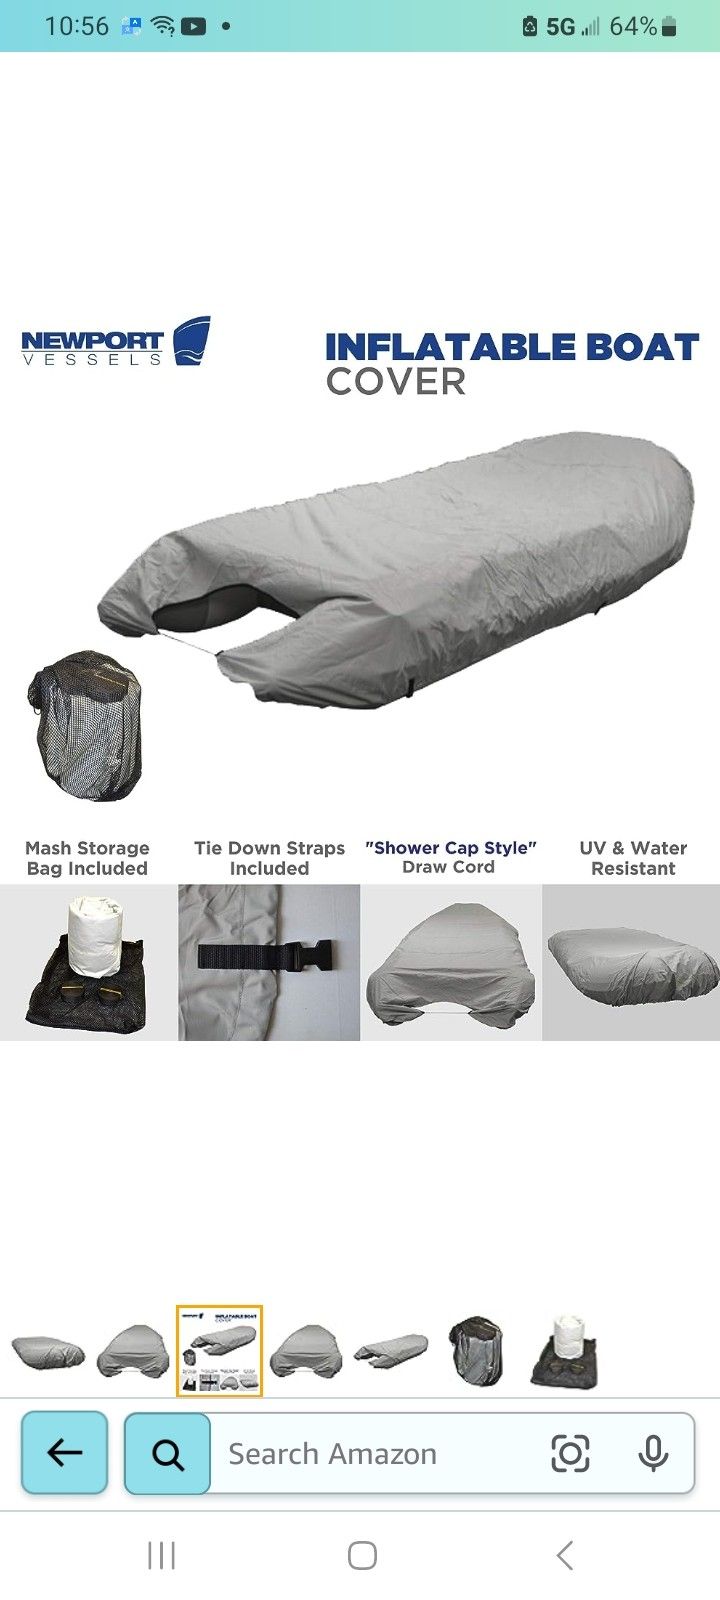 INFLATABLE DINGHY BOAT COVER